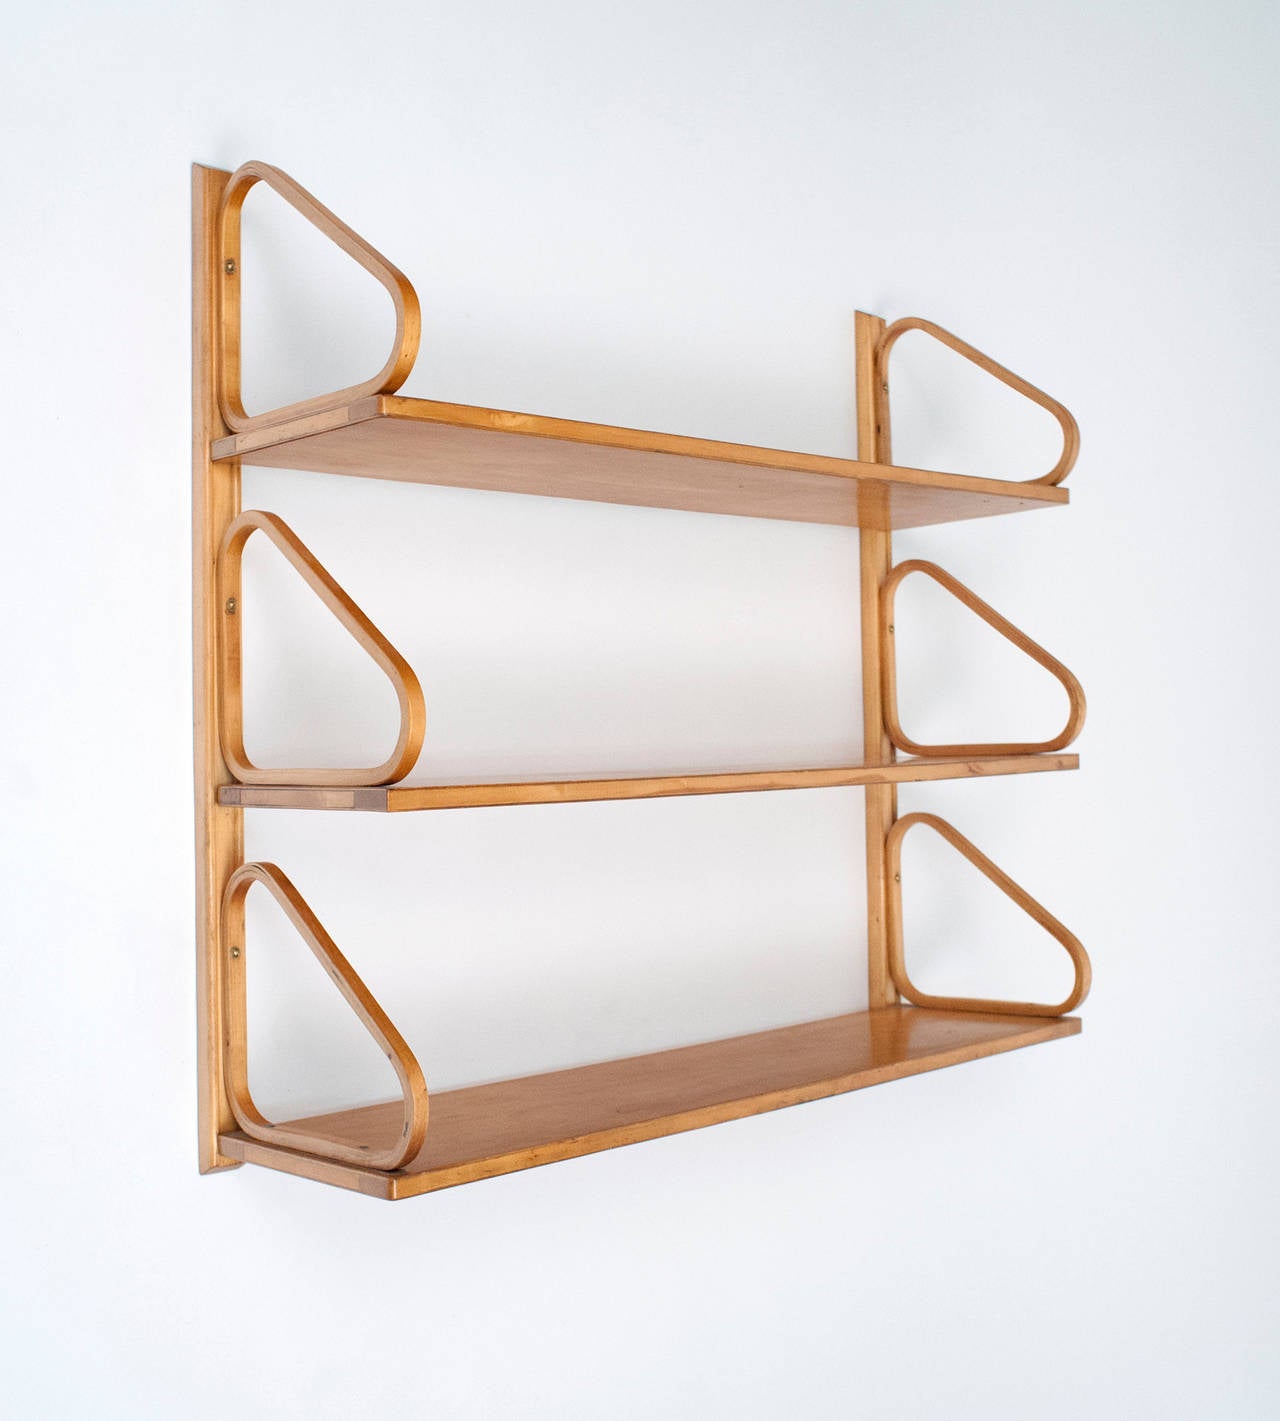 Rare set of three shelves by Finnish designer Alvar Aalto. Complete with original hanging bracket. Birch has developed a beautiful honey colored patina. Condition is excellent. Shelves measure: 33.5